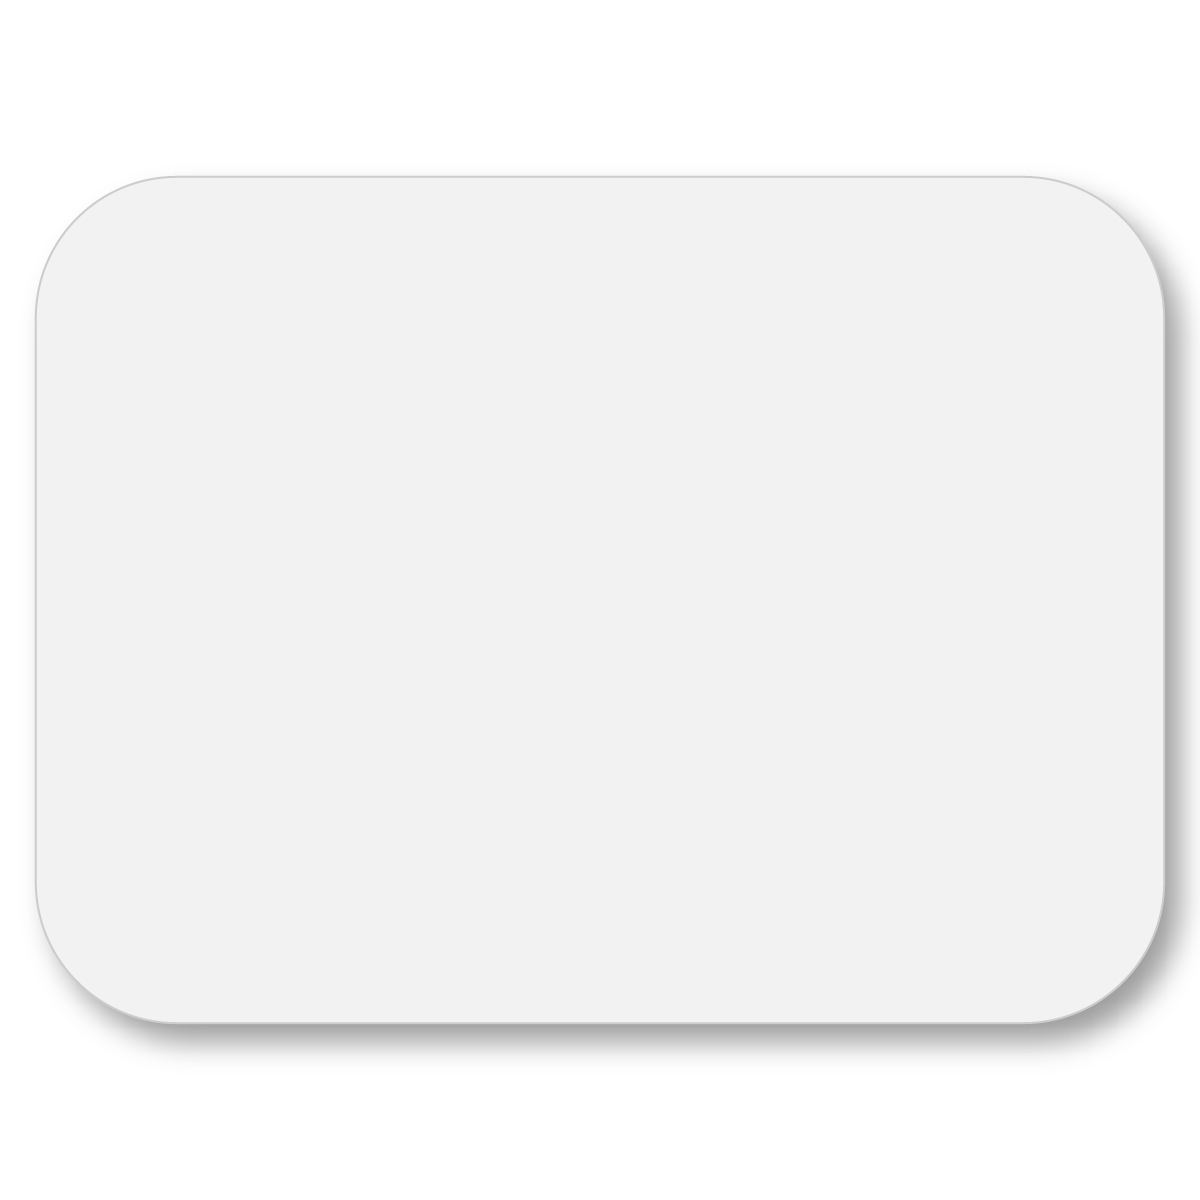 White 6" x 8" Hard Surface Mouse Pad 1/8" Foam